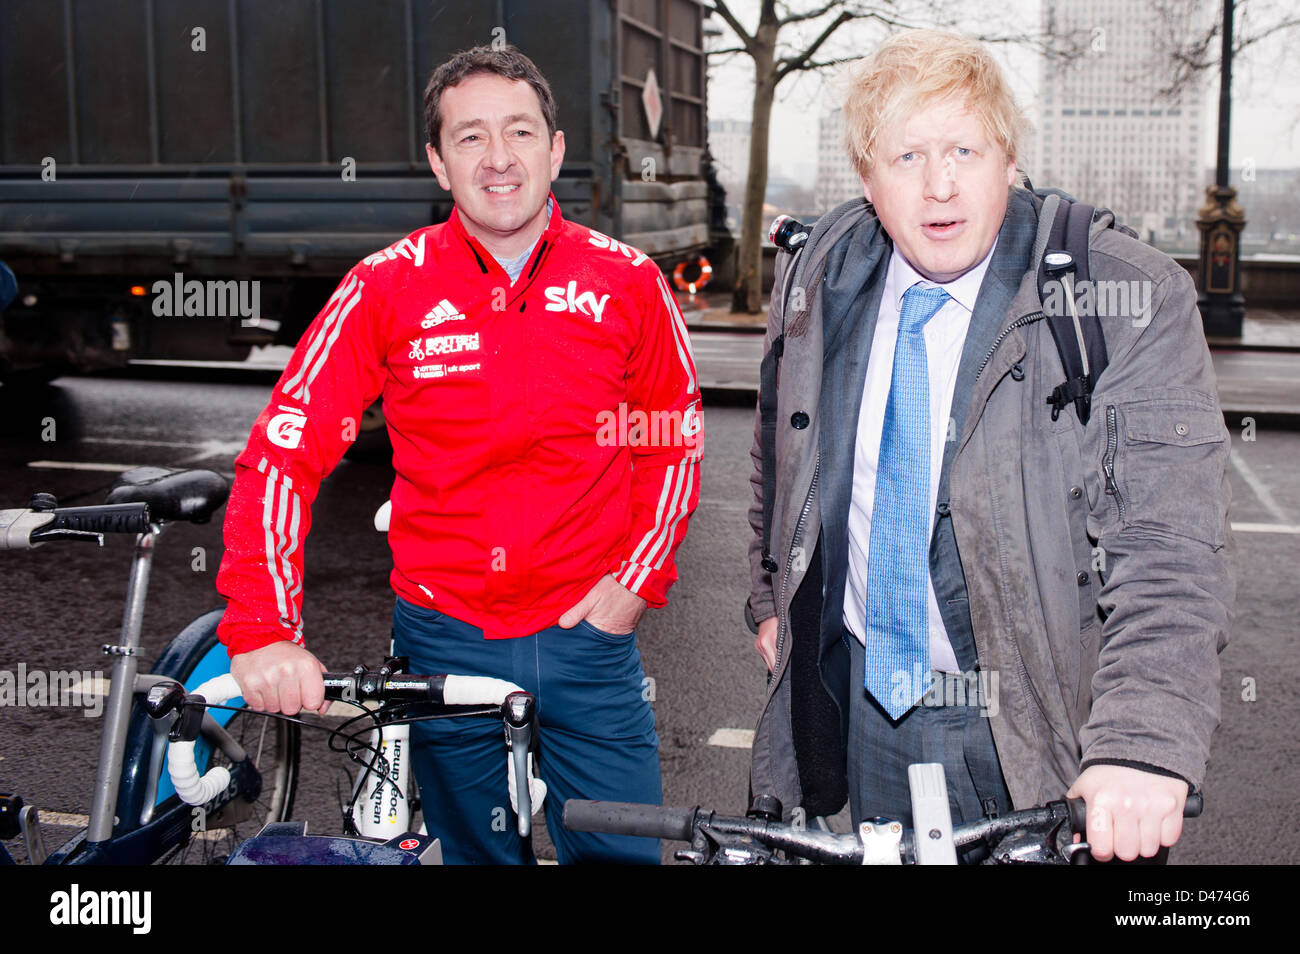 London, UK. 7th March 2013. The Mayor of London Boris Johnson and British Cycling’s Chris Boardman MBE – a former World Champion and Olympic gold medallist – arrive by bike at Victoria Embankment for interviews about the new vision for cycling. Pcruciatti / Alamy Live News Stock Photo